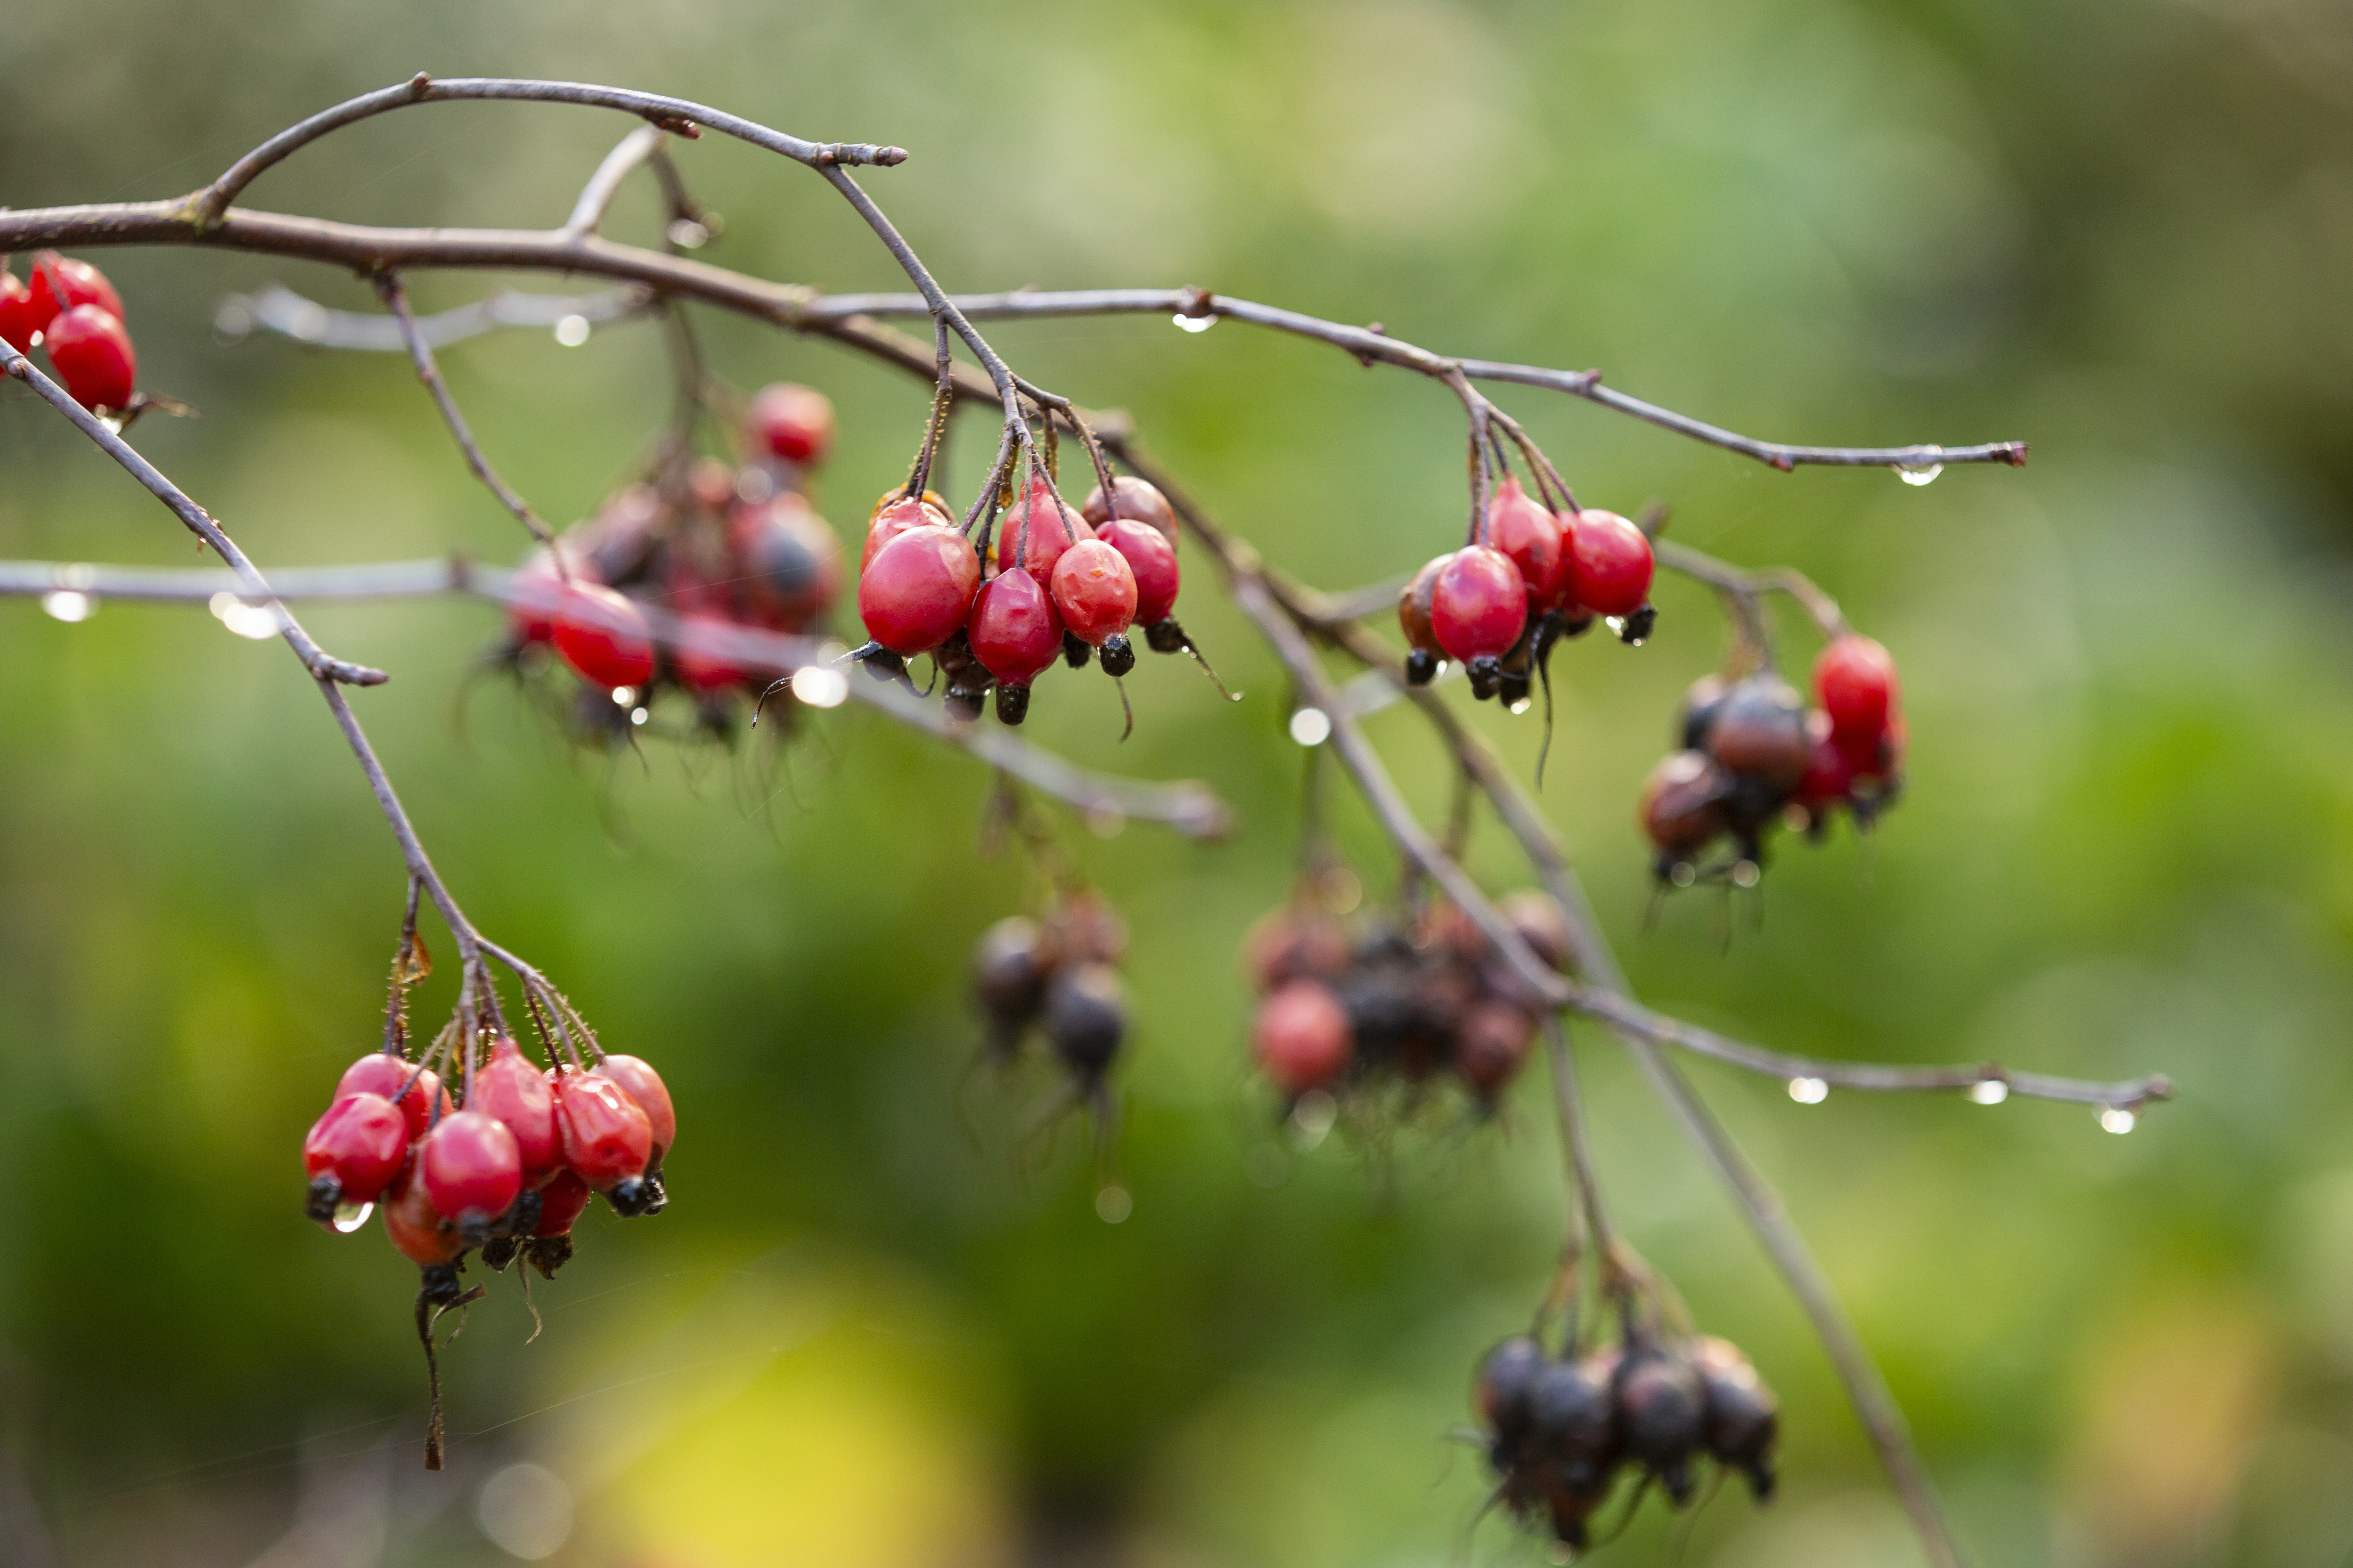 Red berries on branches